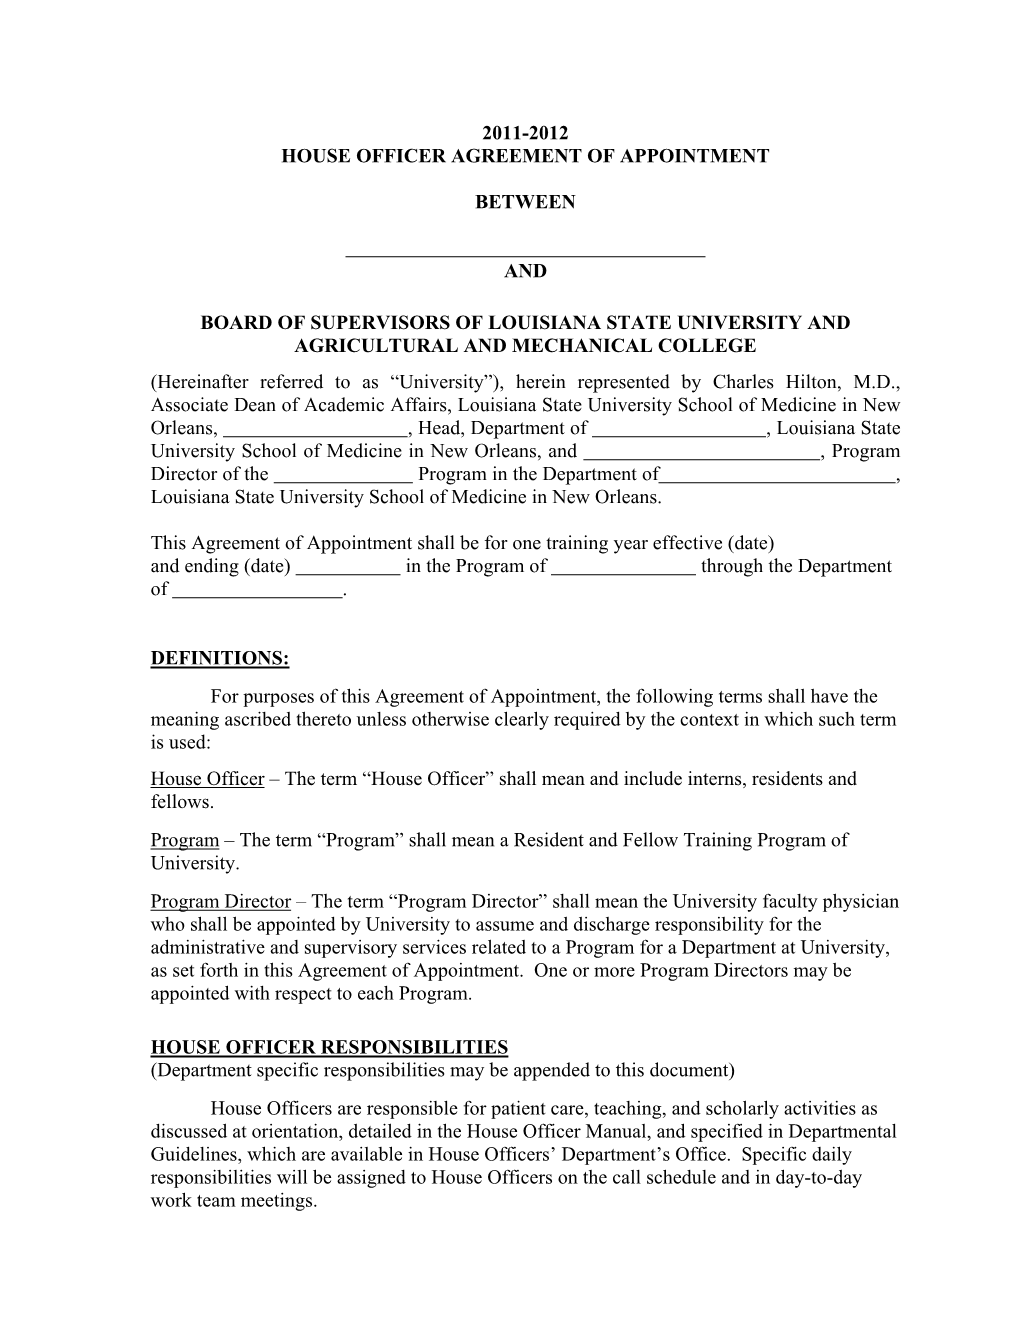 House Officer Agreement of Appointment